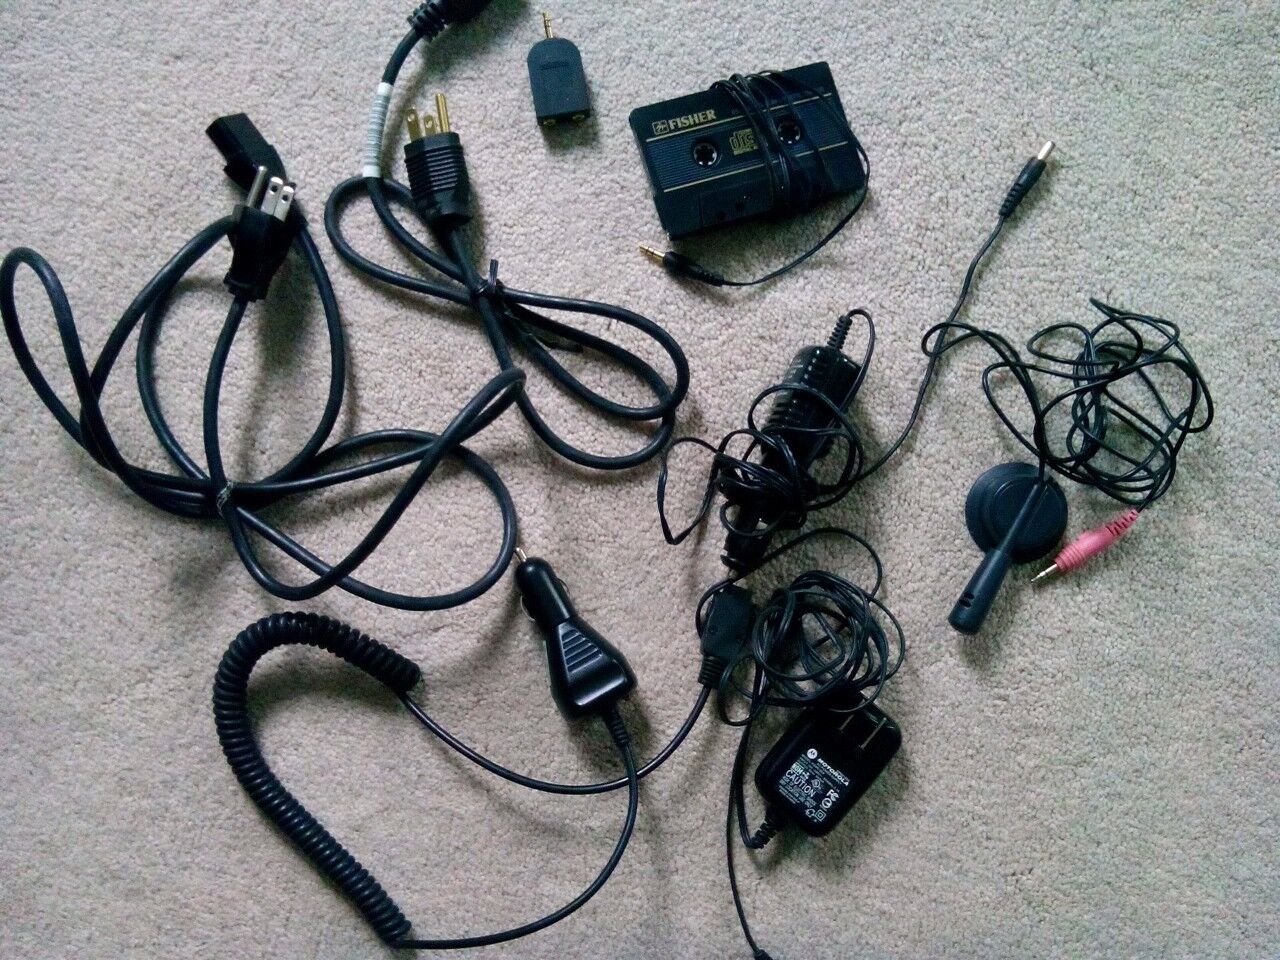 Lot of 8 Vintage Computer/Car Accessories (Chargers/Adapter/Cables/Etc.) Fisher, Sanyo, Motorola, Radio Shack